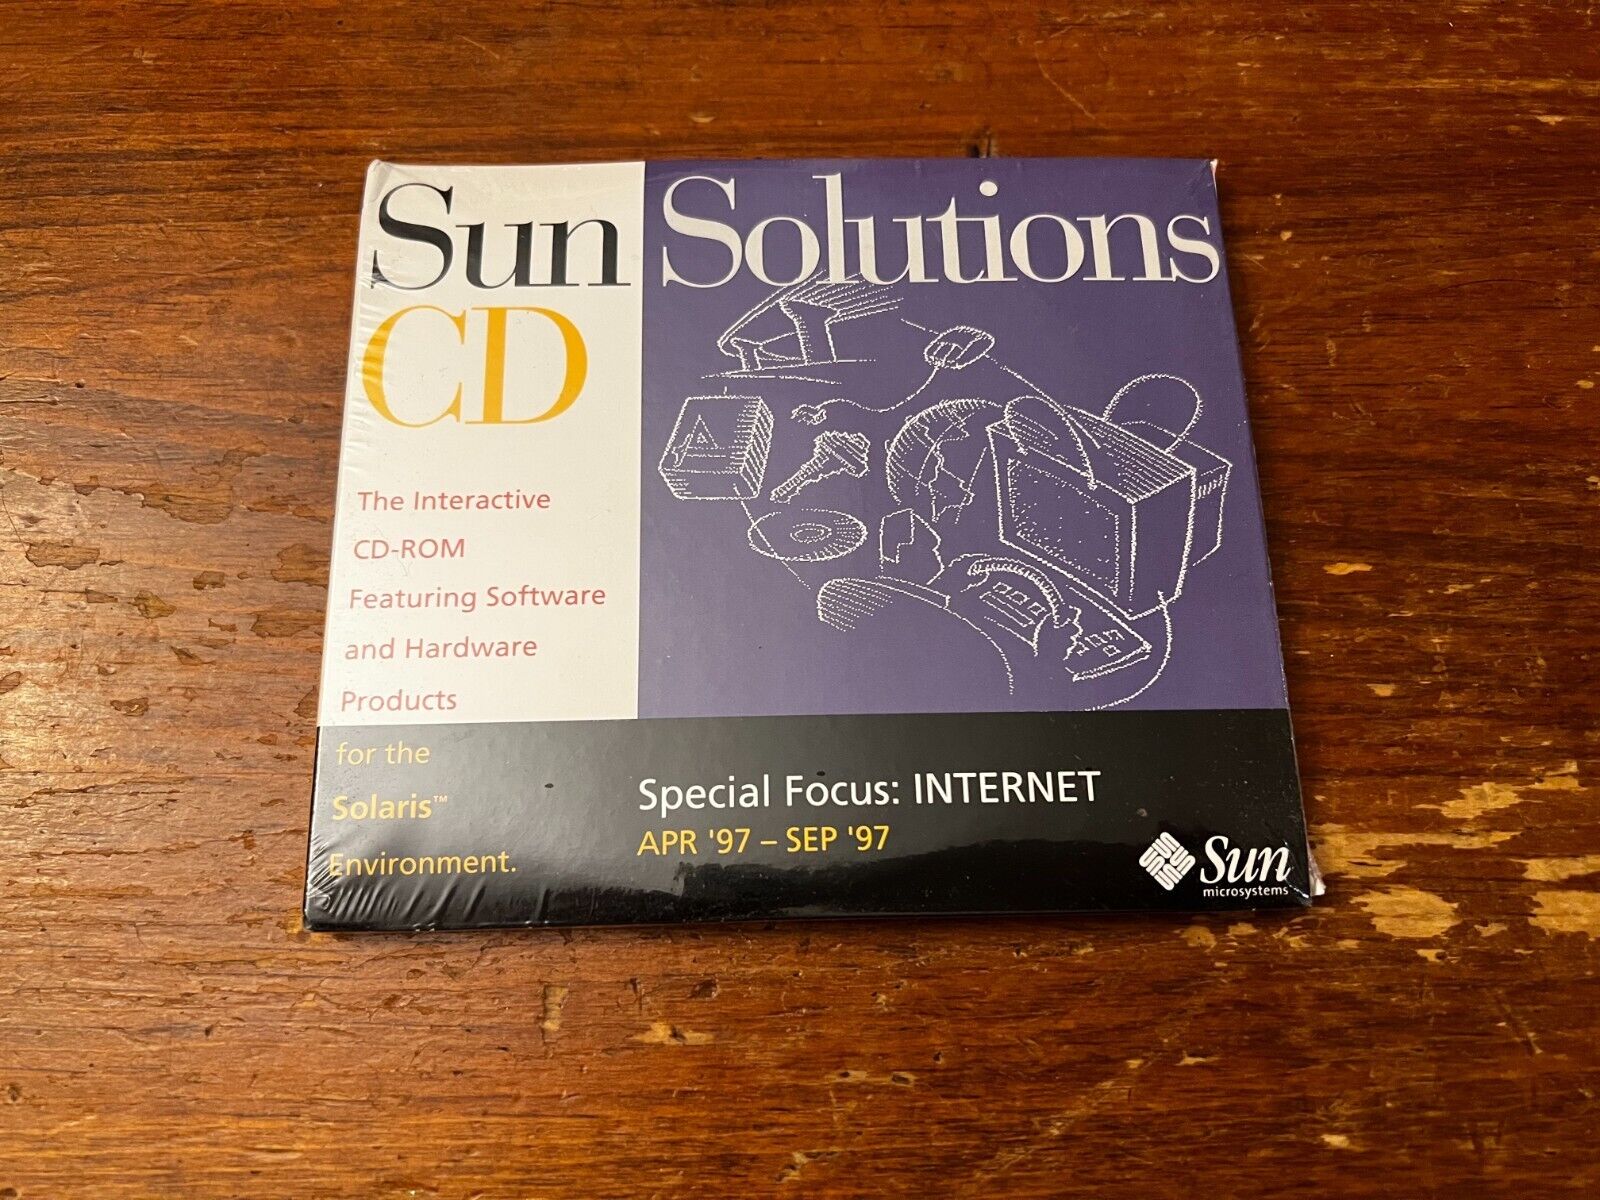 Sun Solutions CD Special Focus:Internet Apr-Sep 1997 NEW SEALED